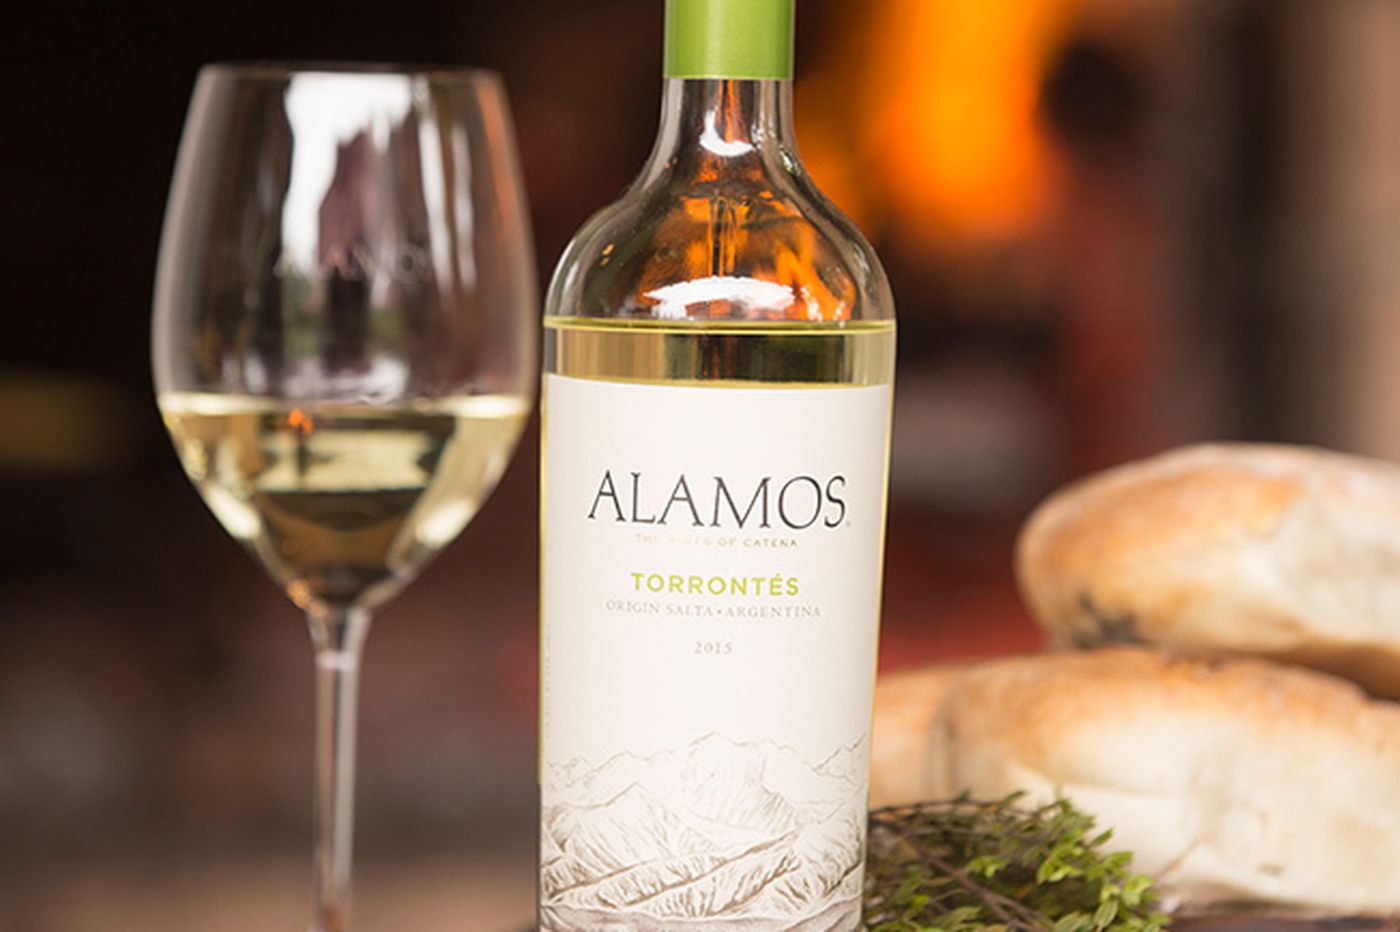 For $10, an uncommon dry white wine from Argentinaâs Salta ...